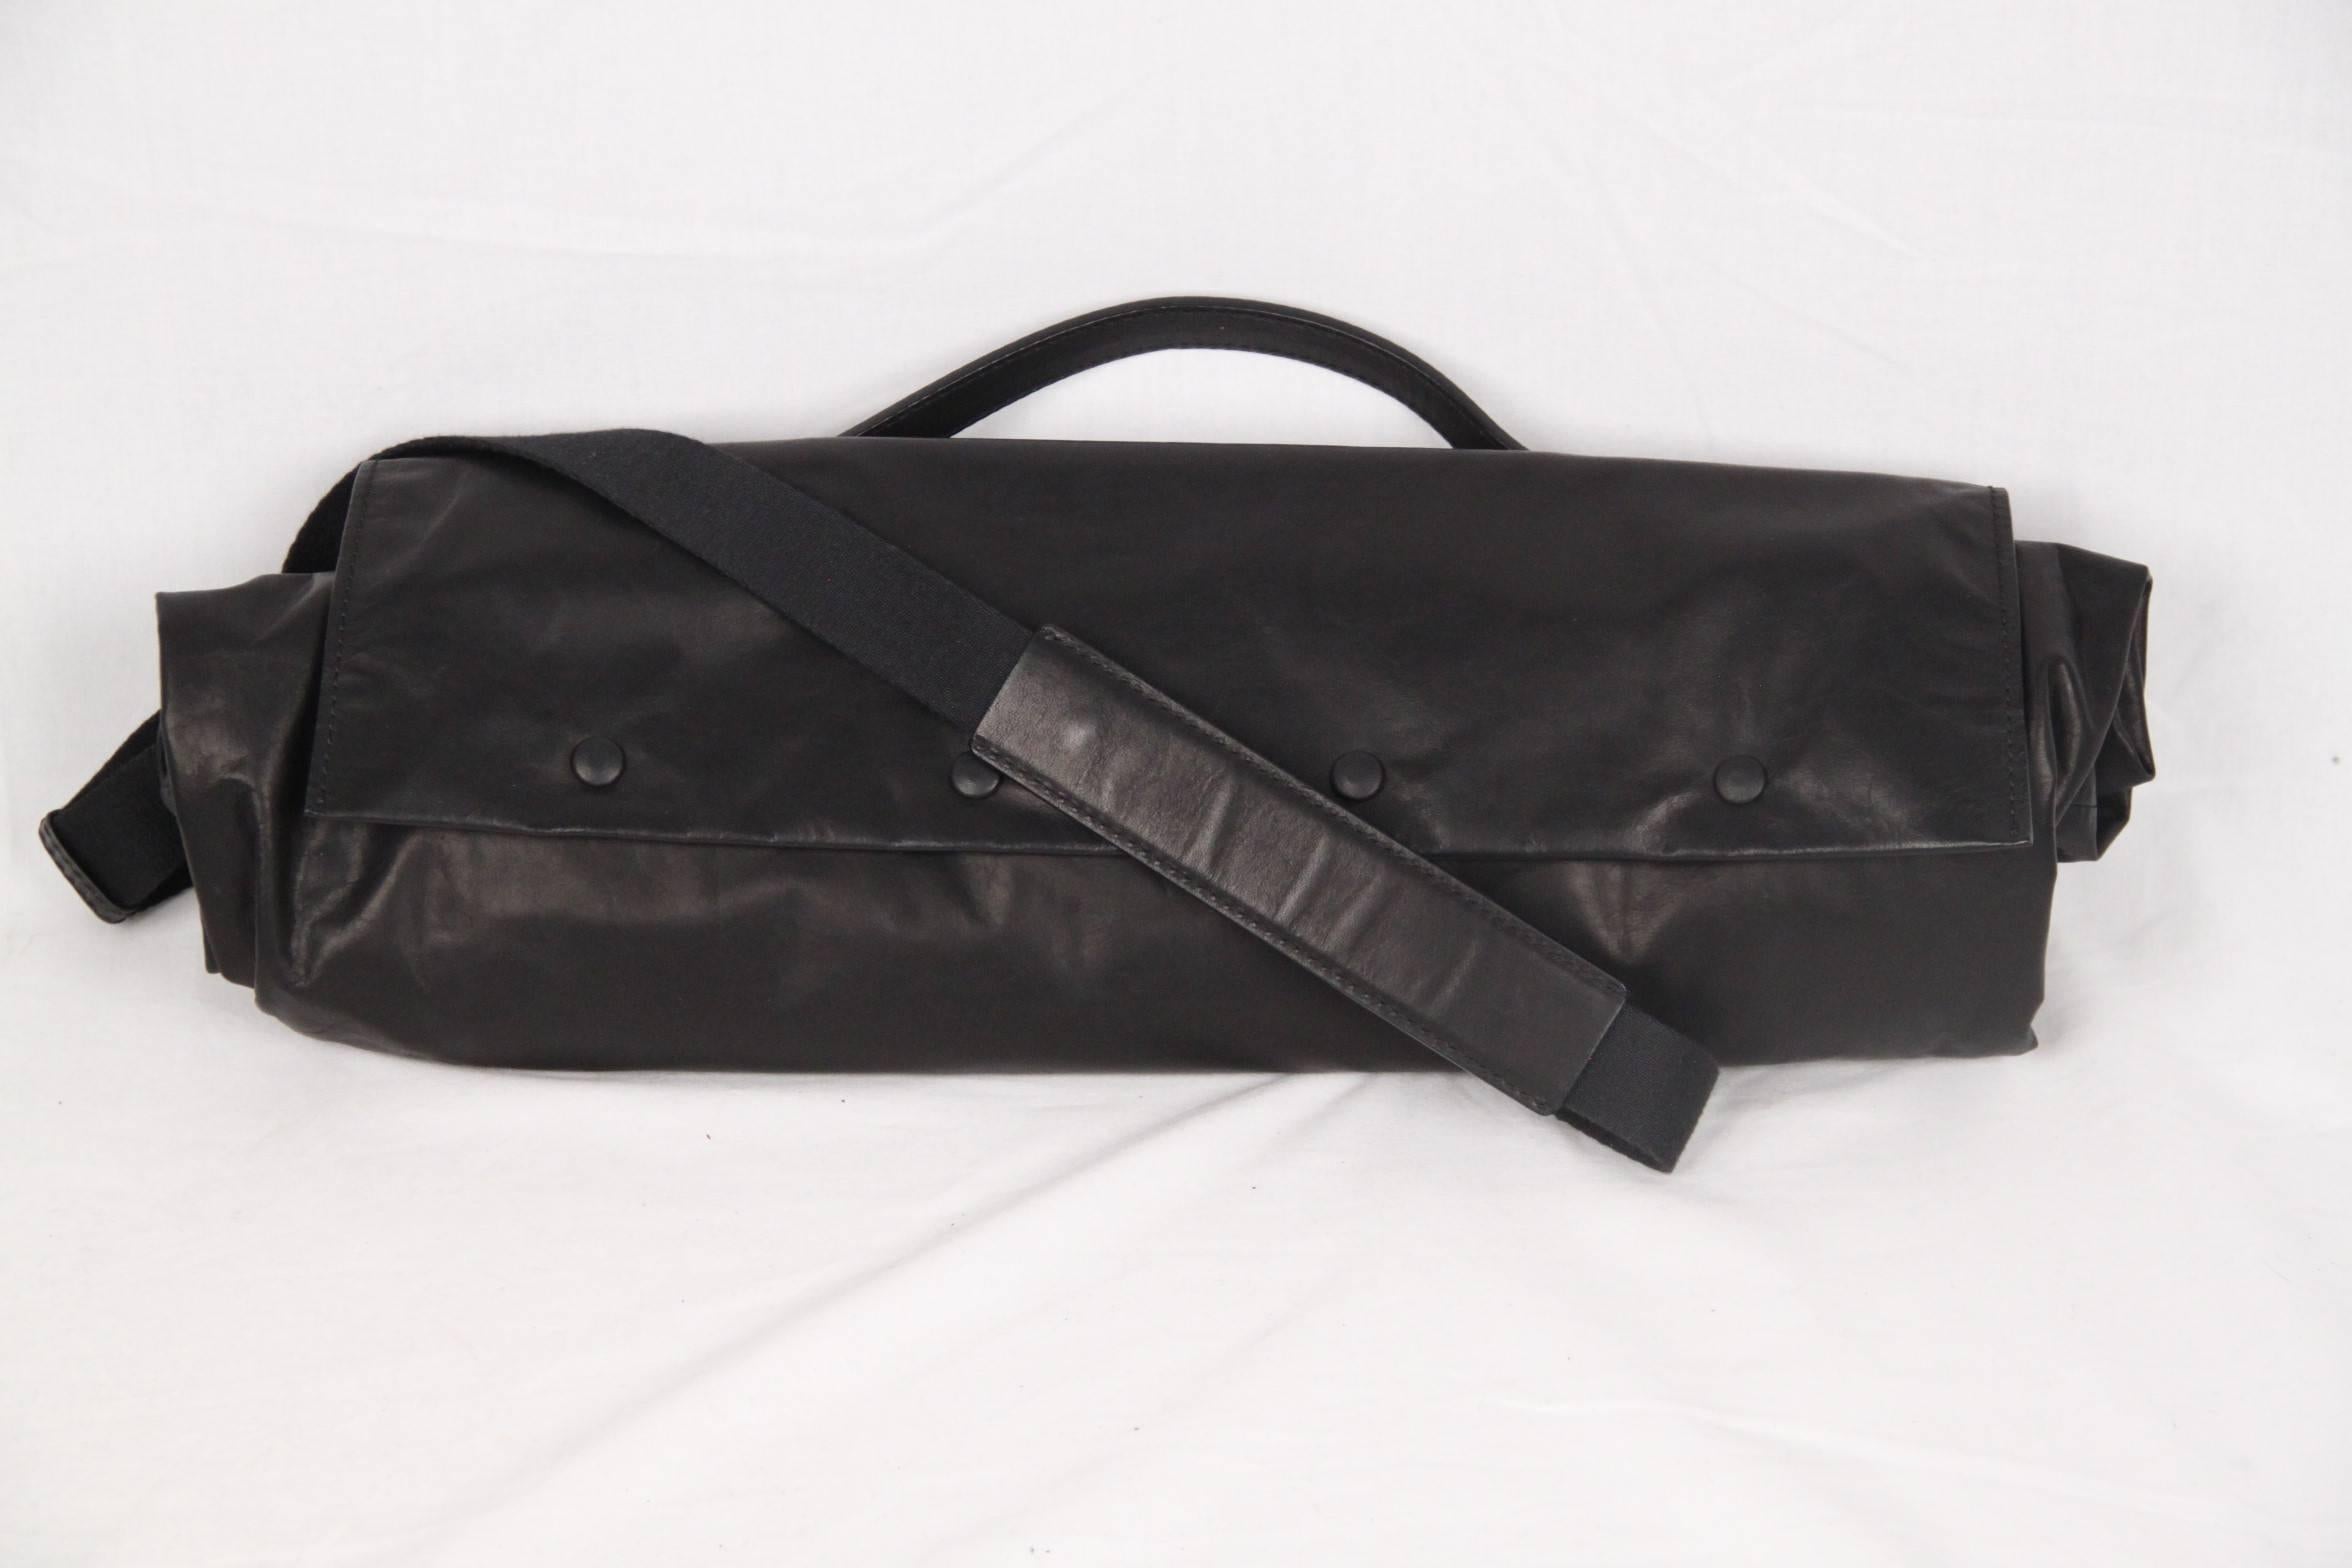 
- Made from black soft washed-leather
- Top handle and adjustable shoulder strap (drop: 17 1/2 inches - 44,5 cm)
- Back zipped pocket
- Silver and tonal hardware
- Snap fastenings 
- Fully lined in canvas
- 2 spacious compartments and 1 side